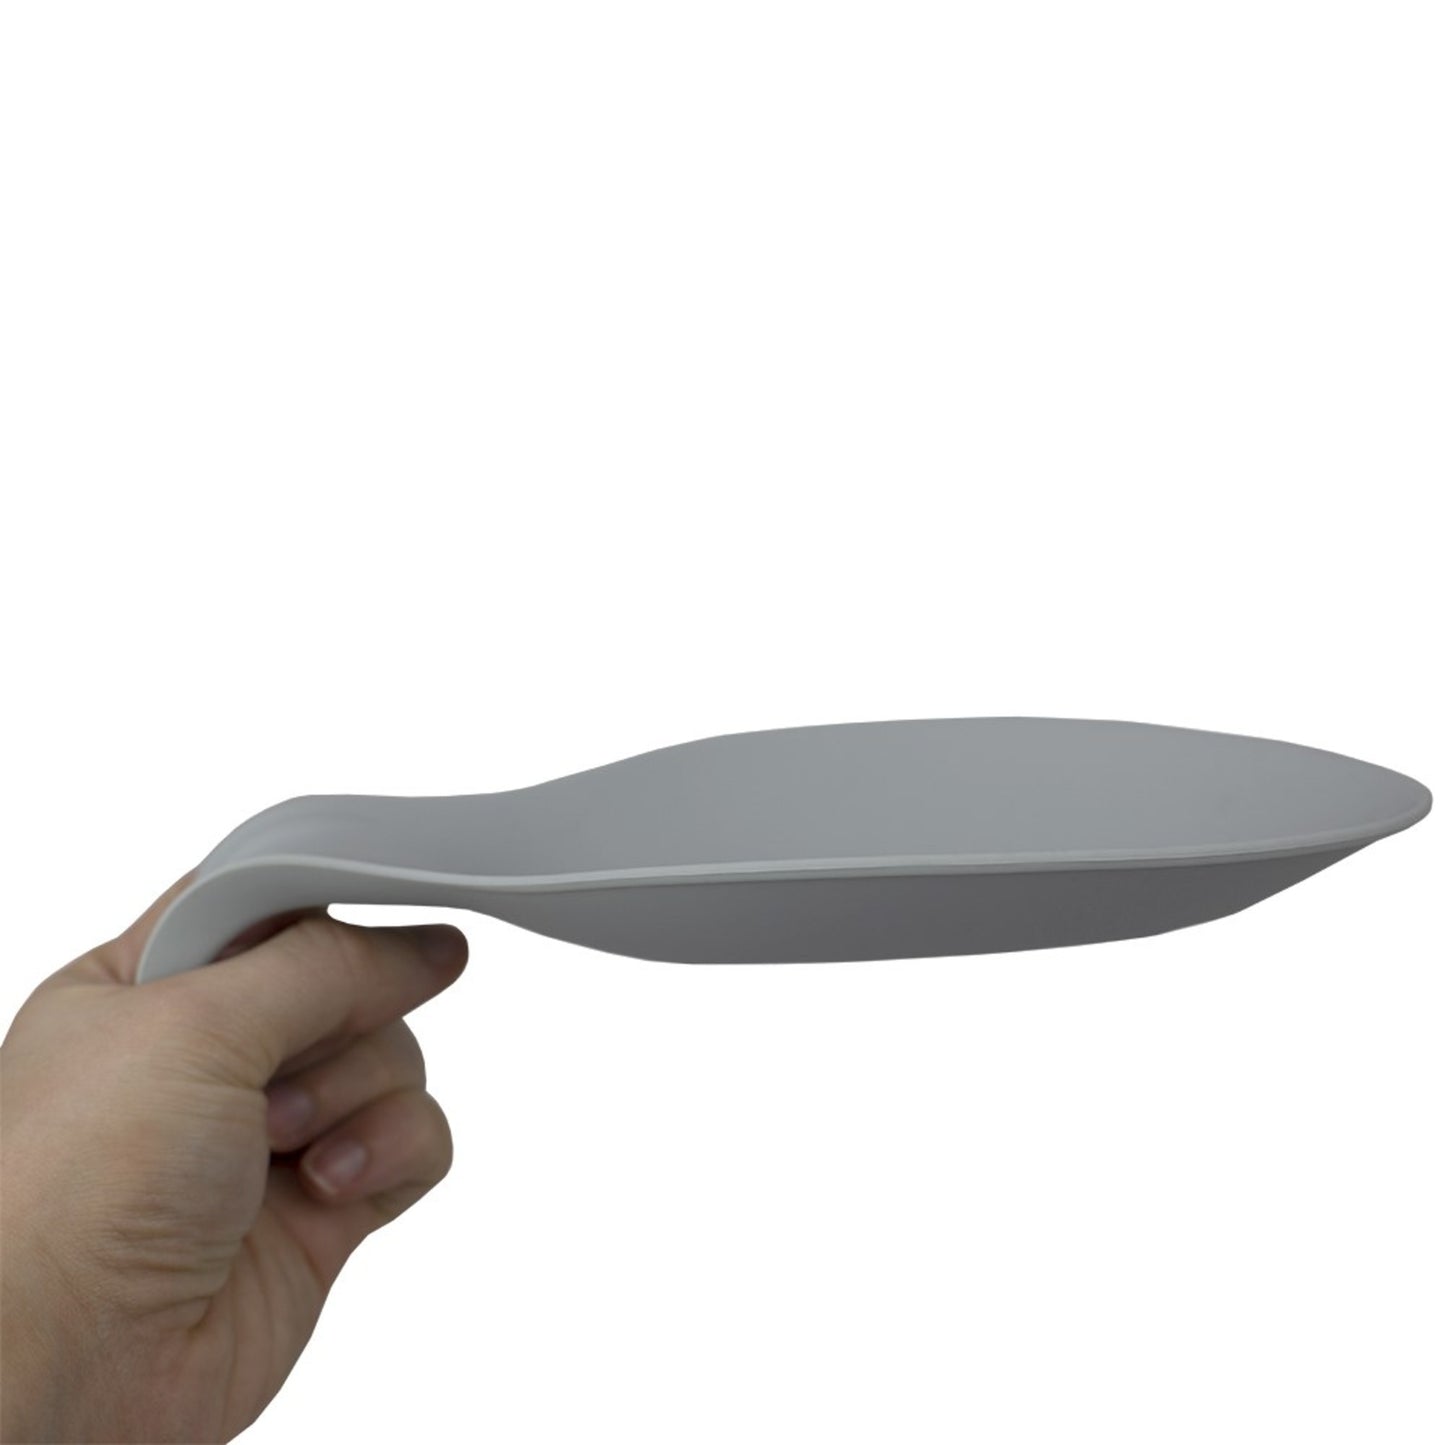 Home Basics Food Grade Flexible Silicone Oversized Almond Shaped Spoon Rest, Grey - Grey